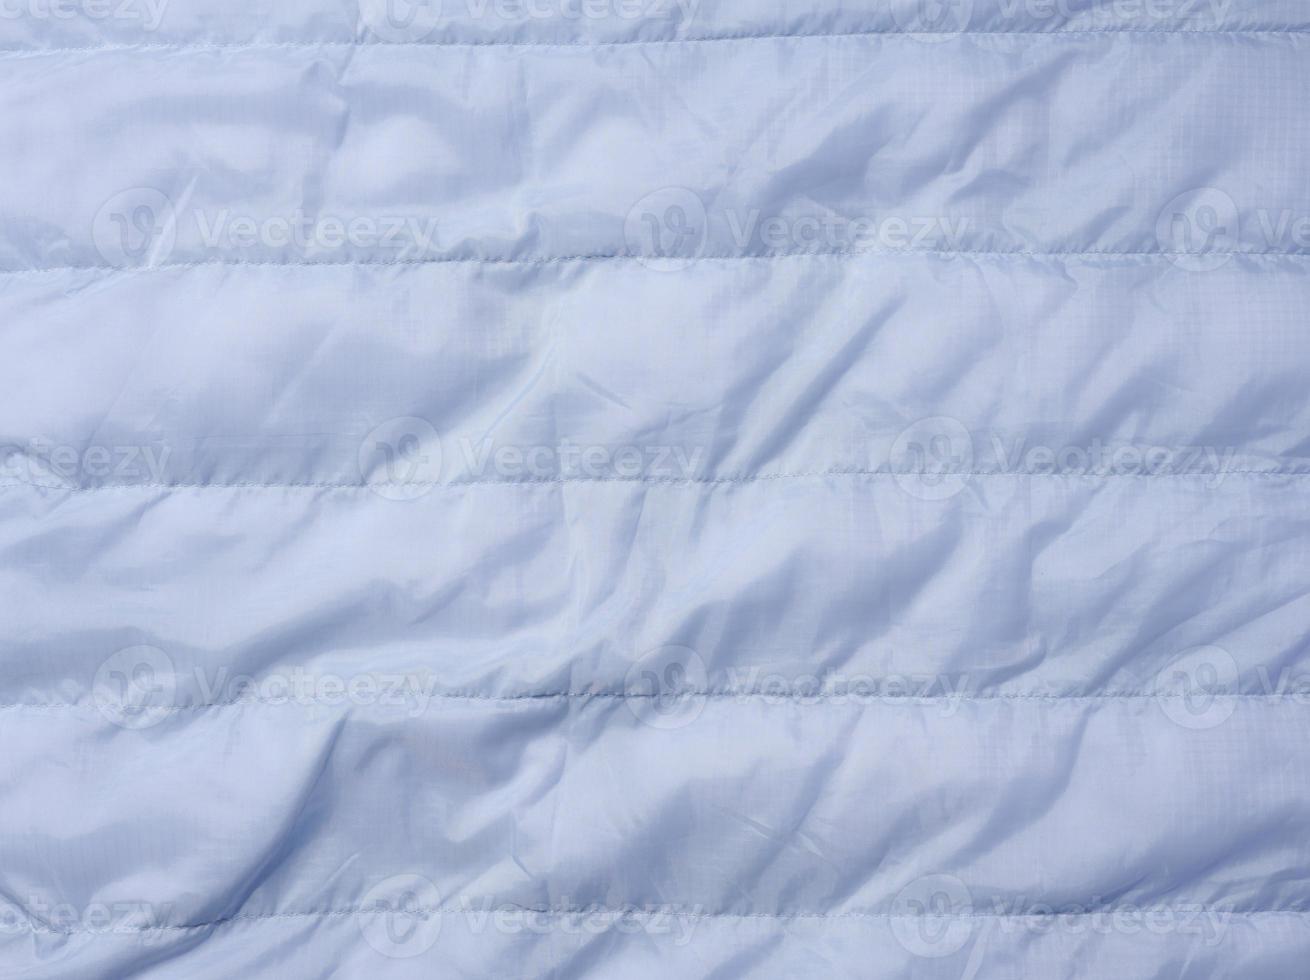 A fragment of blue fabric with down filling and stitching, fabric for jackets and coats photo